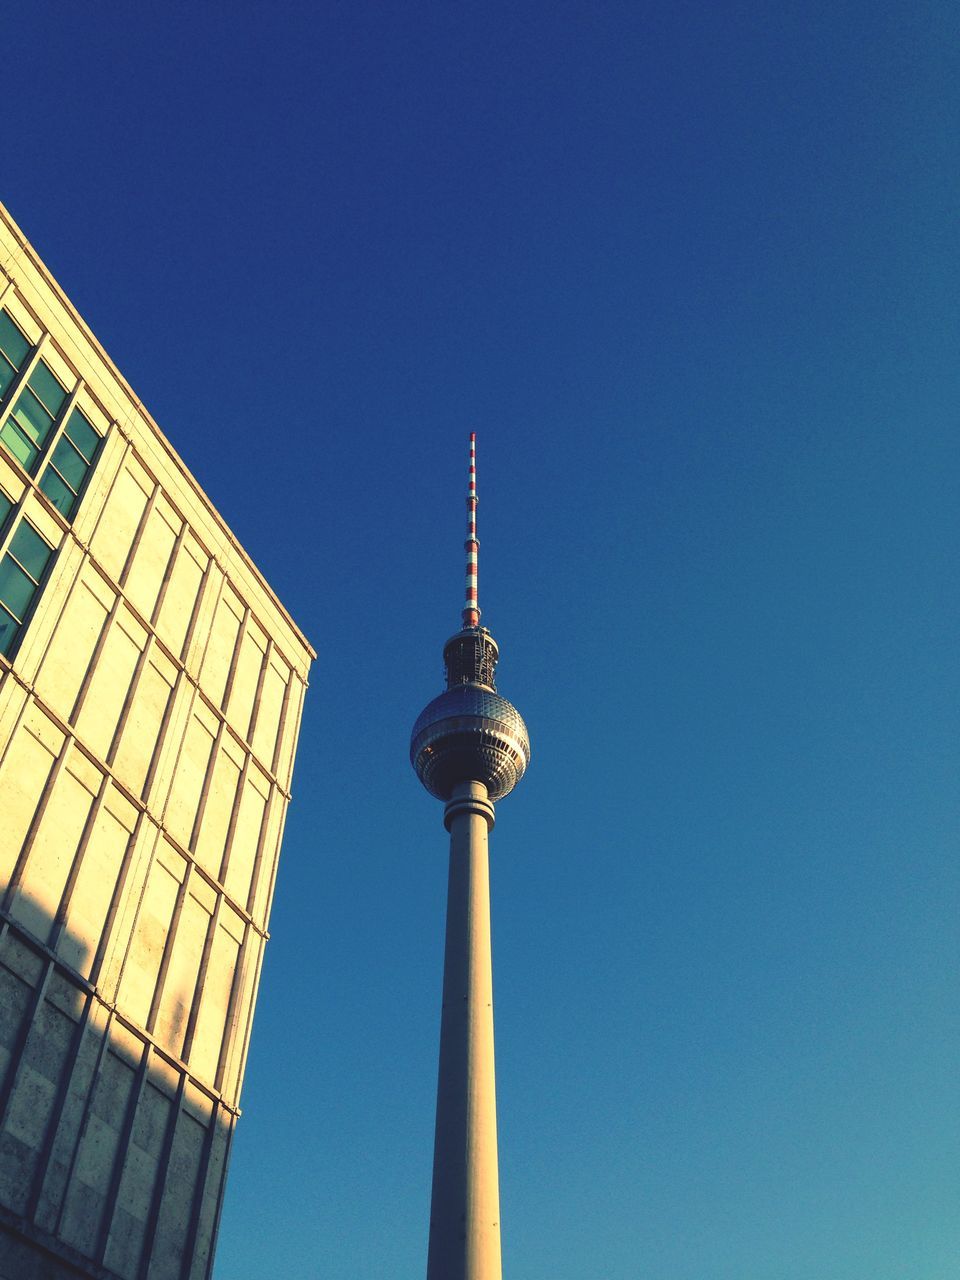 architecture, built structure, building exterior, tower, communications tower, tall - high, clear sky, spire, low angle view, city, fernsehturm, capital cities, famous place, international landmark, travel destinations, communication, television tower, blue, tourism, culture